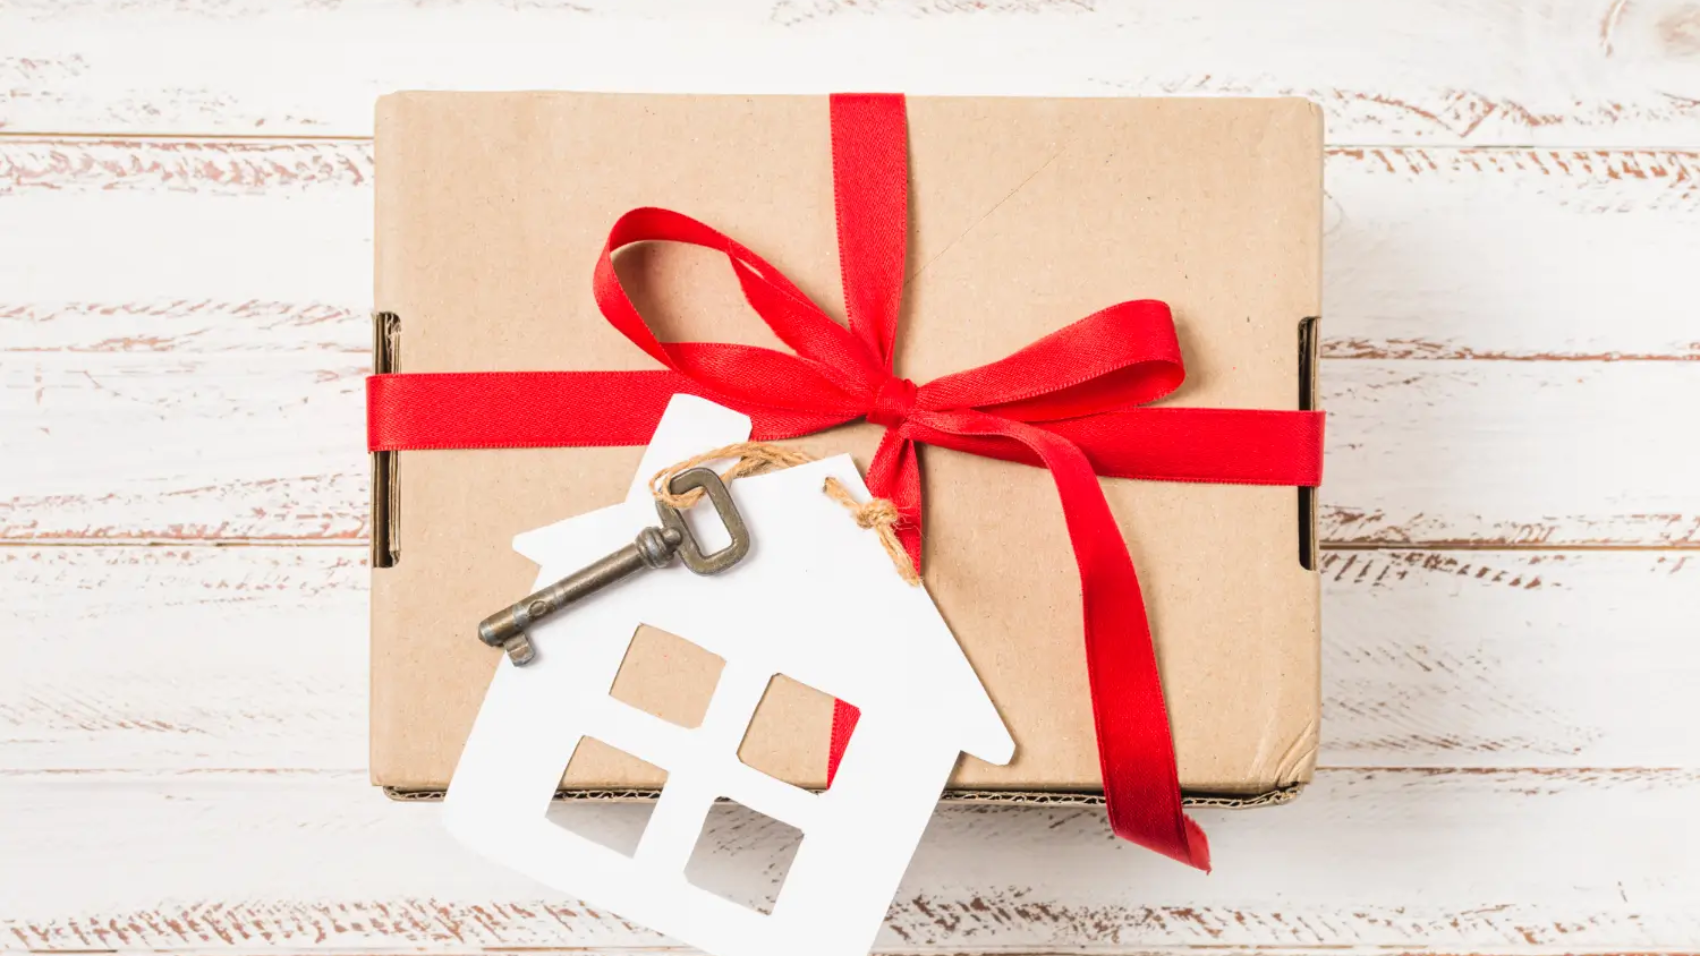 close-up-house-key-tied-with-red-ribbon-brown-gift-box-painted-wooden-desk (1)